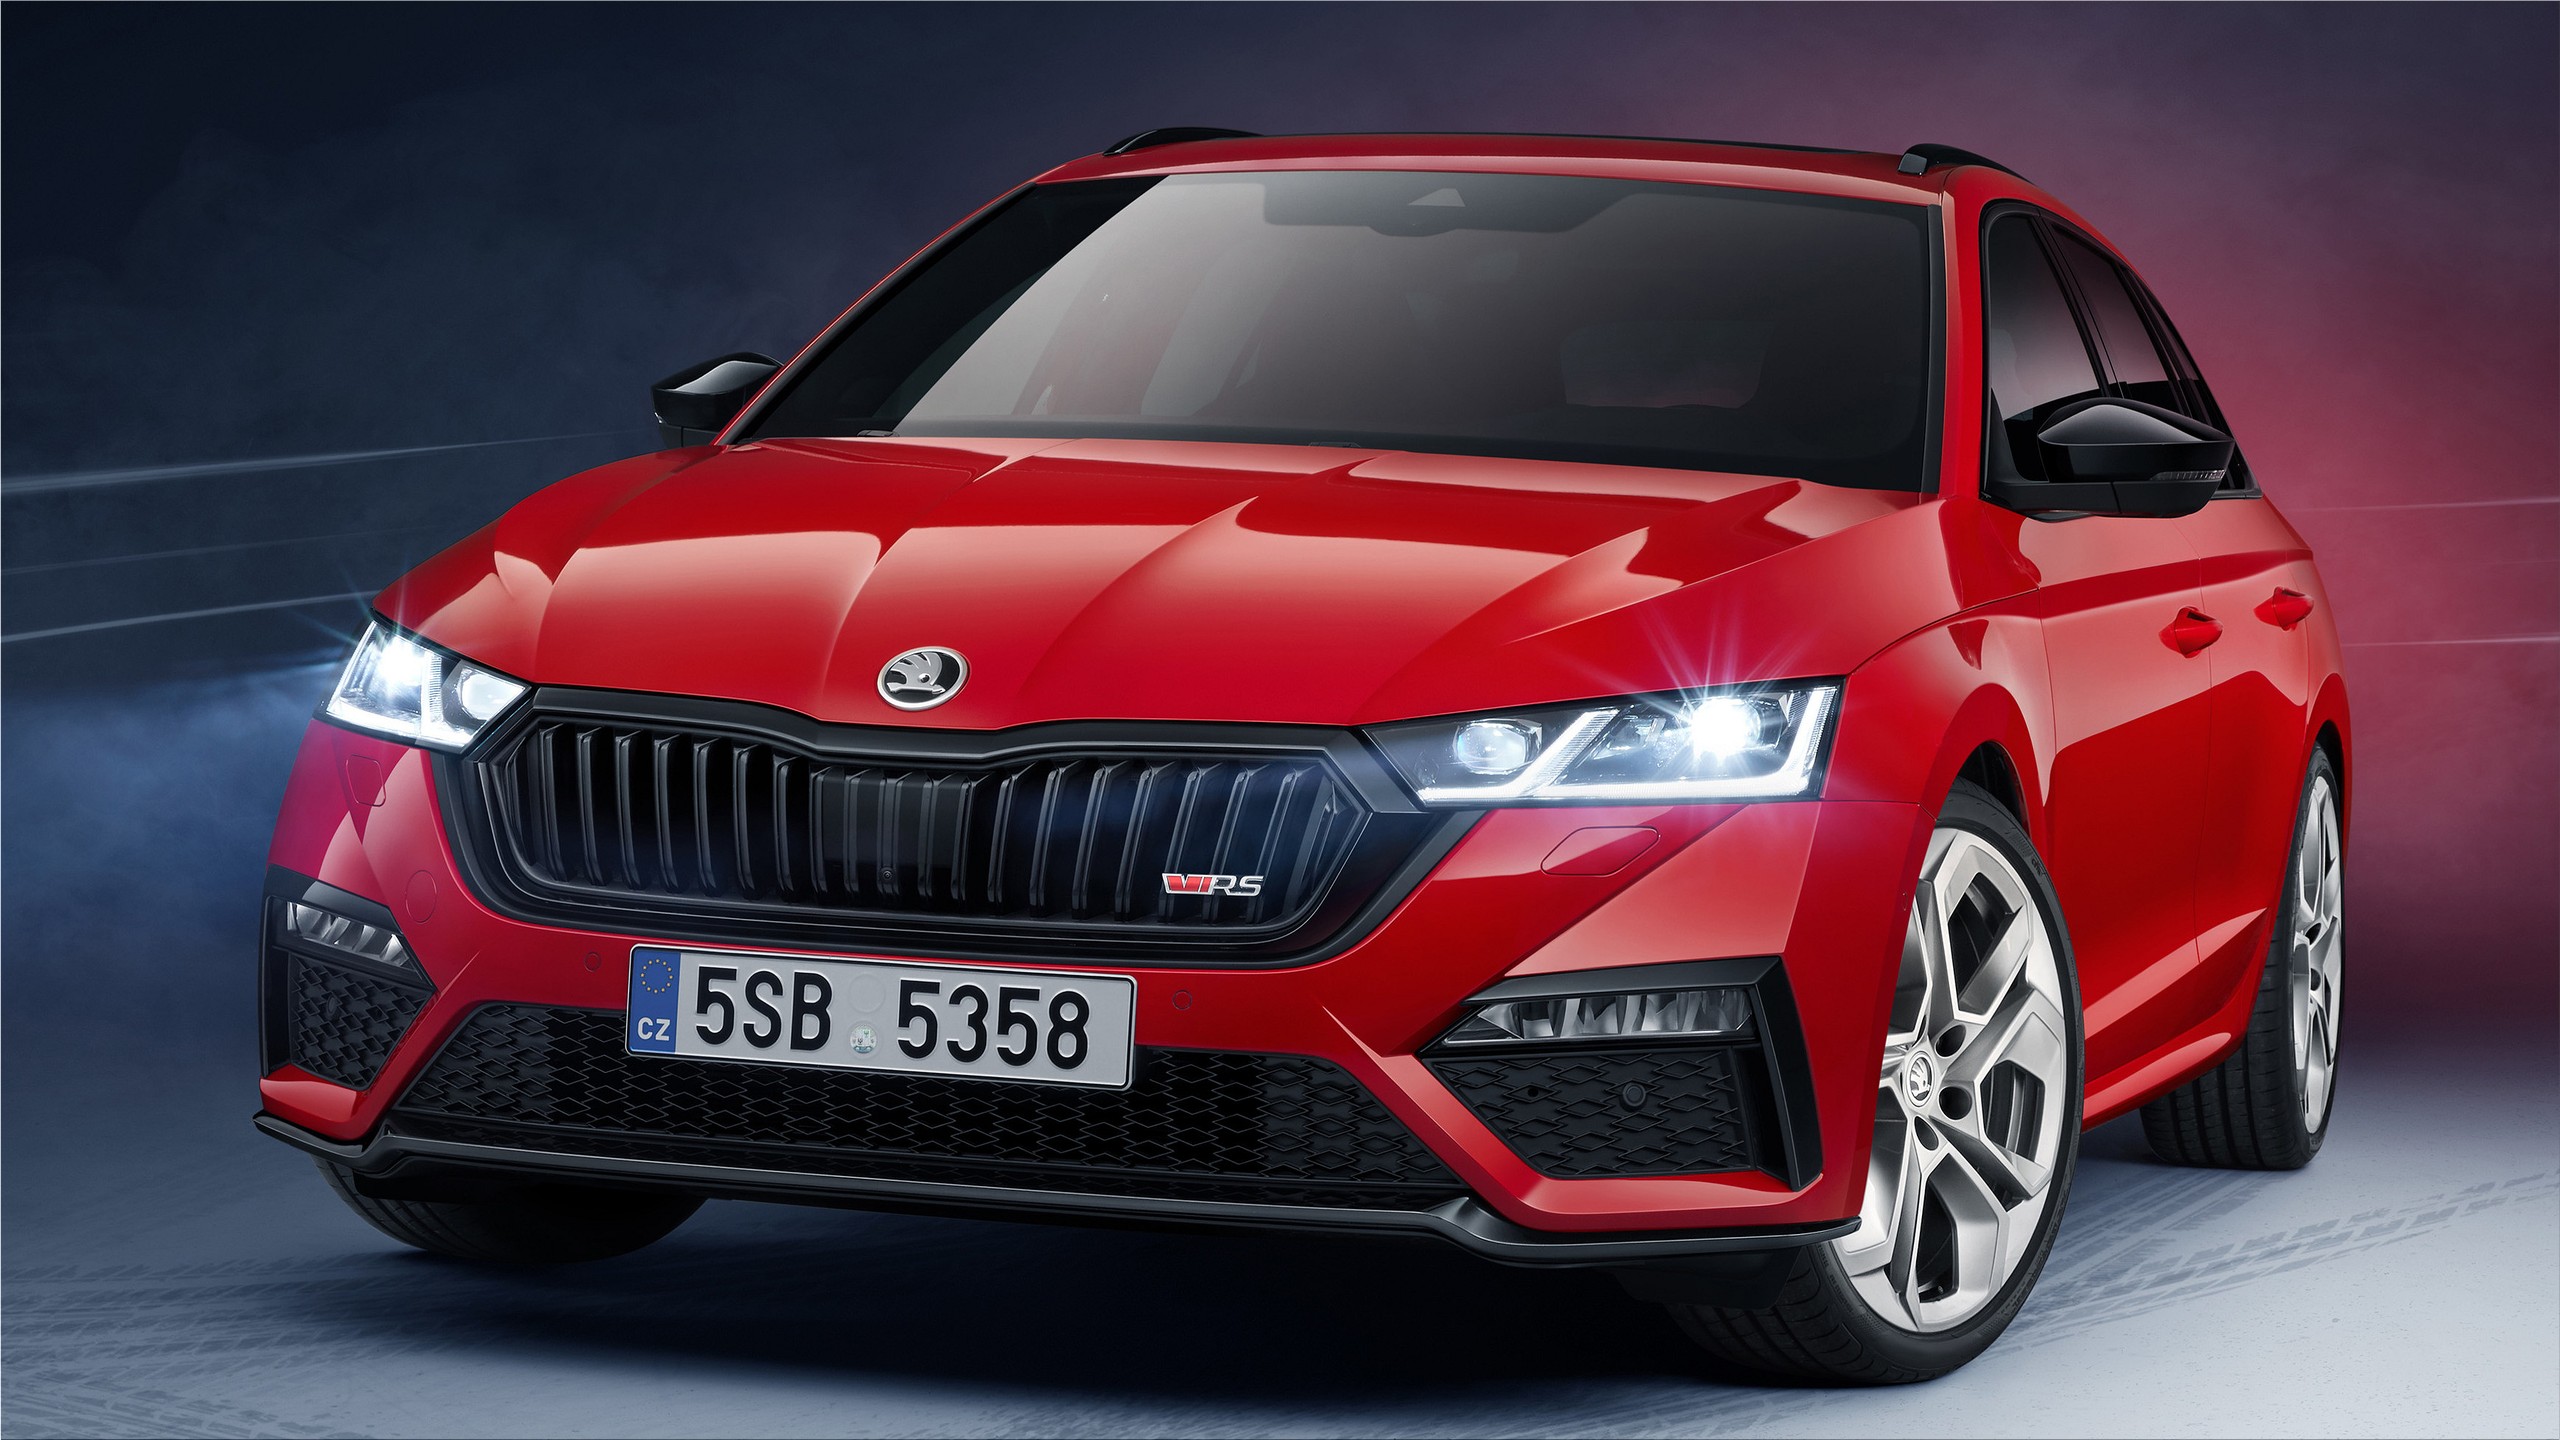 The Skoda Octavia Combi Rs With Pure Combustion Engines Car Division